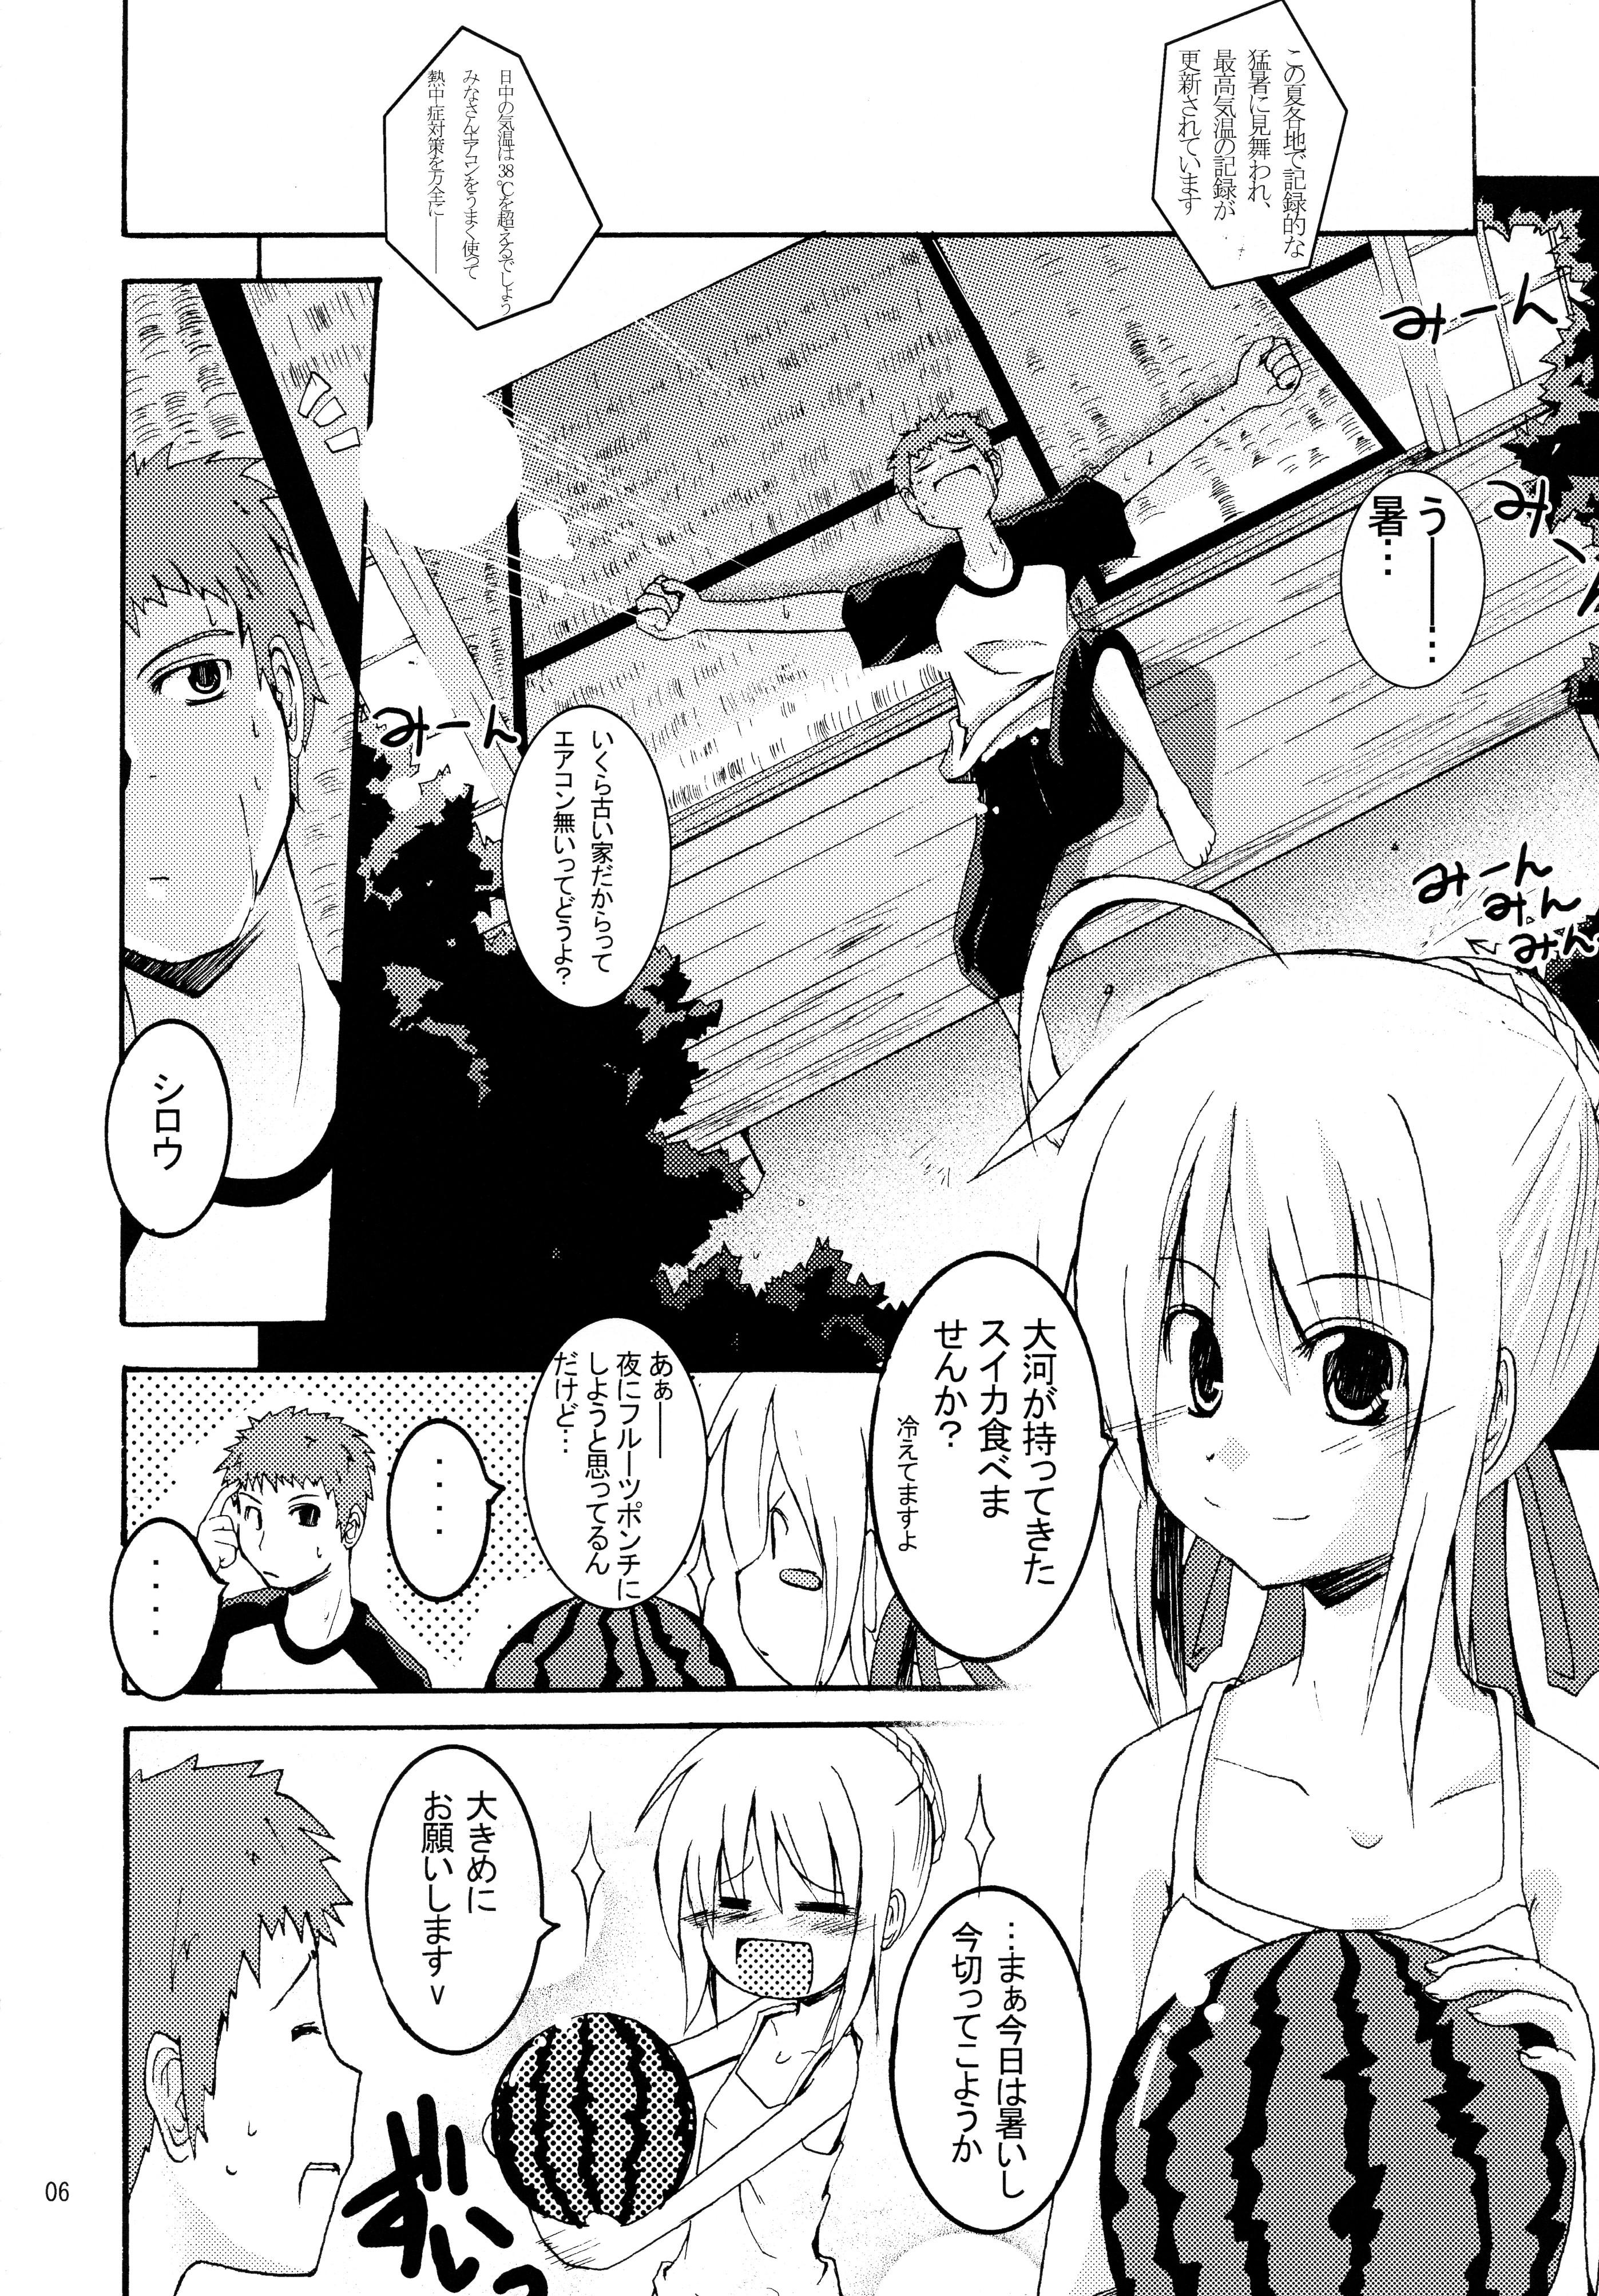 Bubble Butt Holiday in the Heat Exhaustion - Fate stay night Web - Page 5